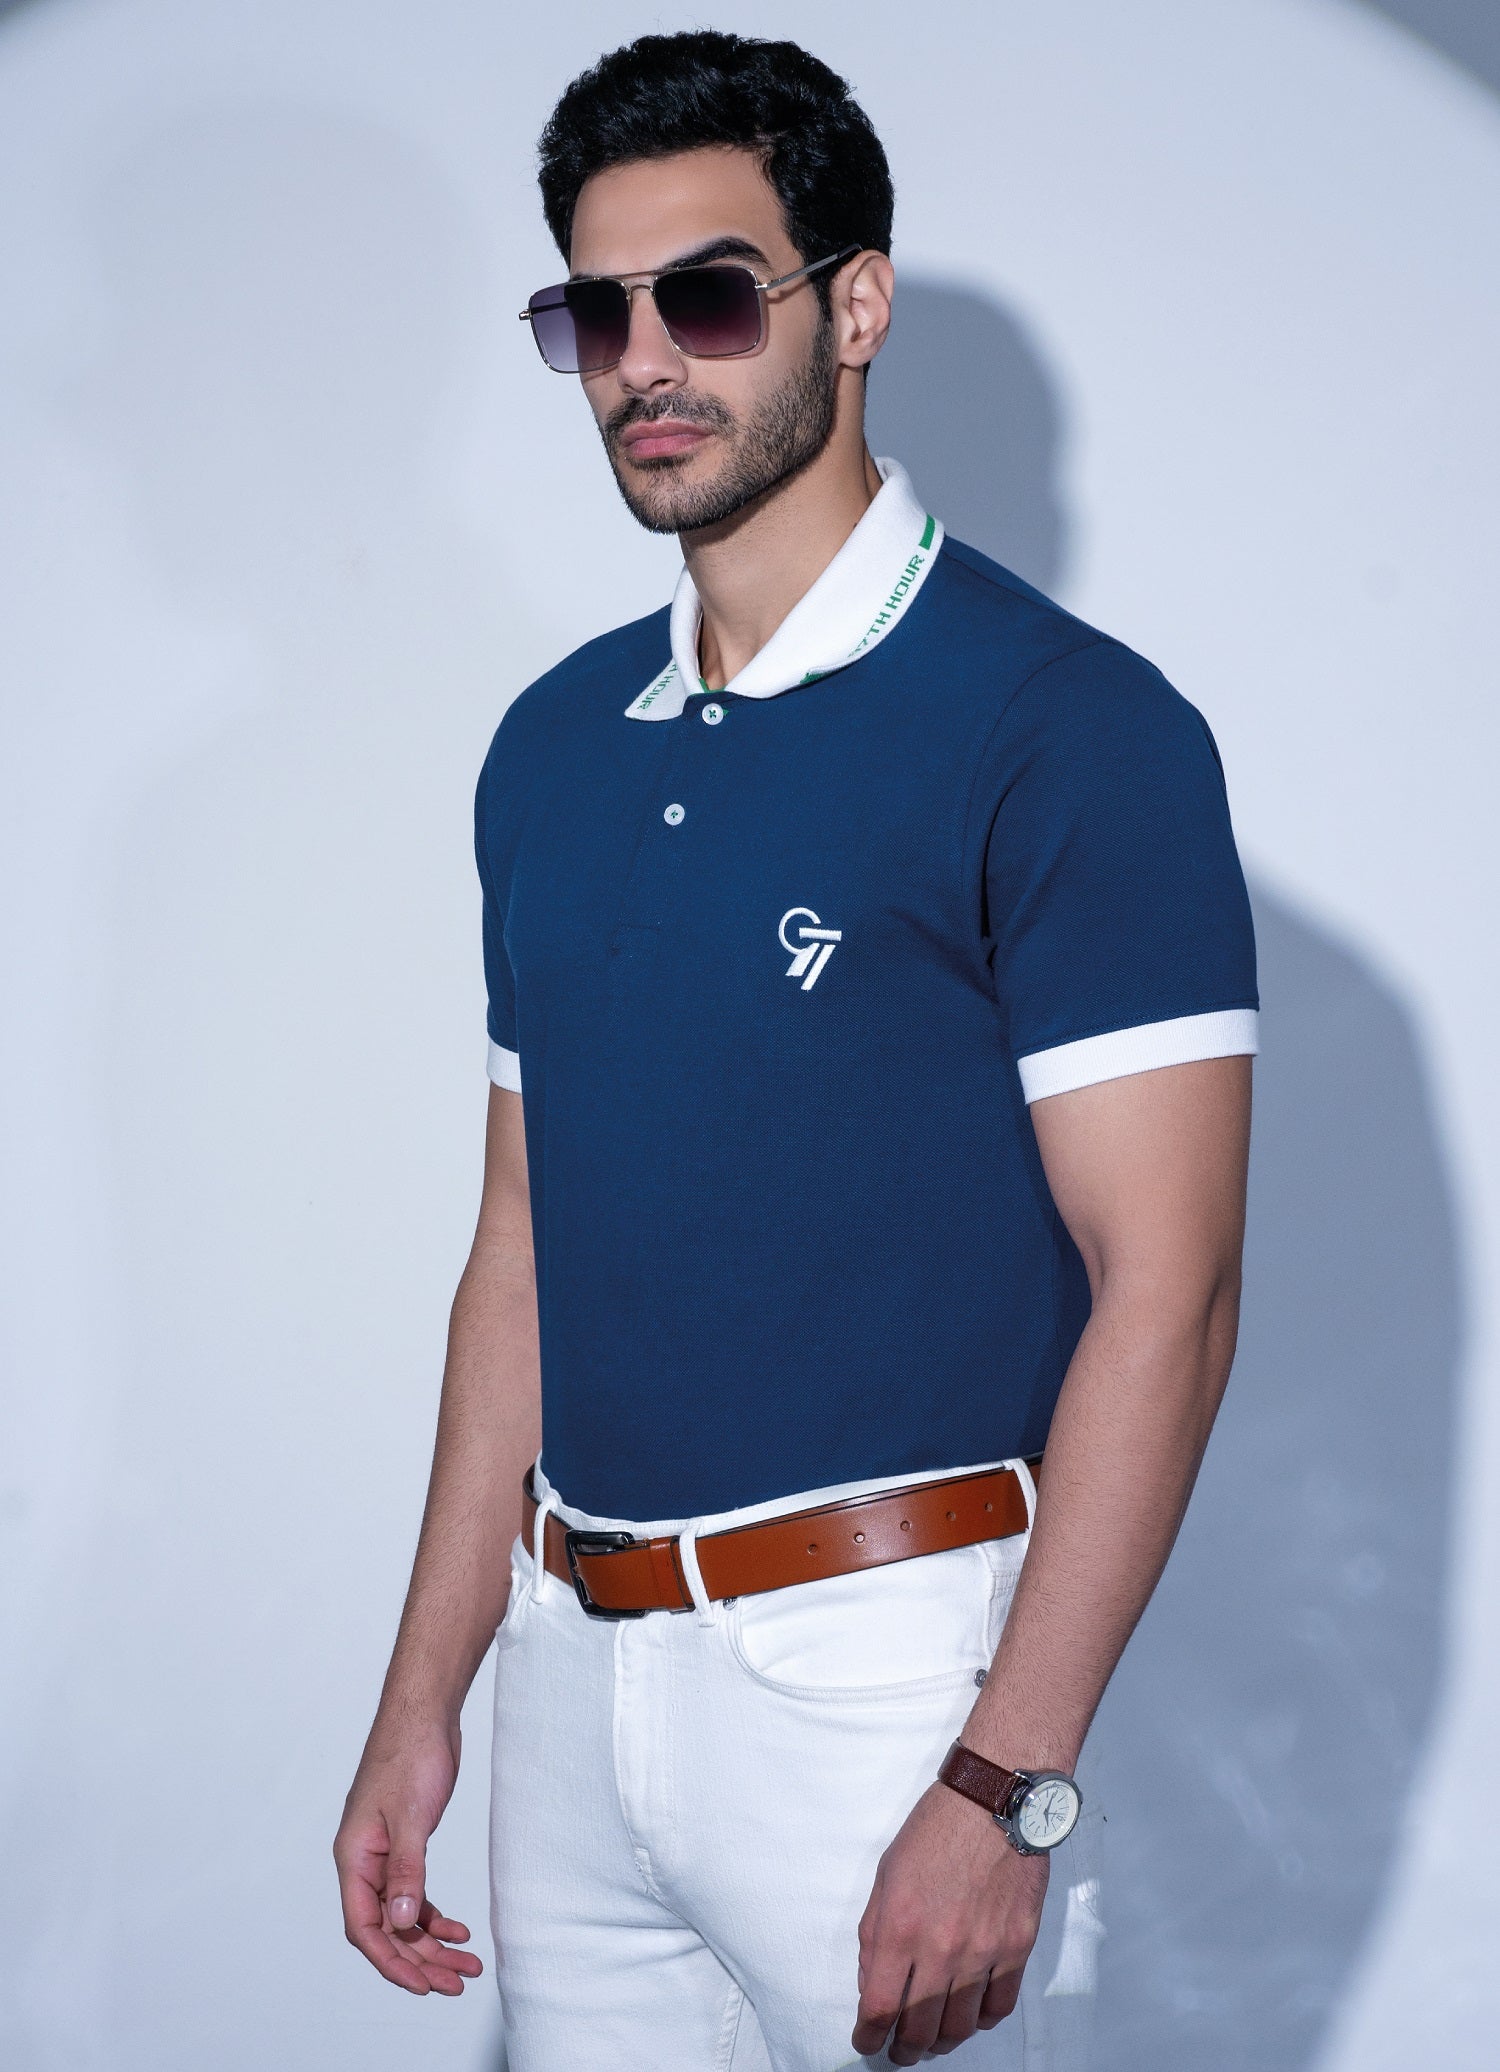 Buy The 97th Hour Smart Navy The 97th Hour Luxury Polo Tshirt